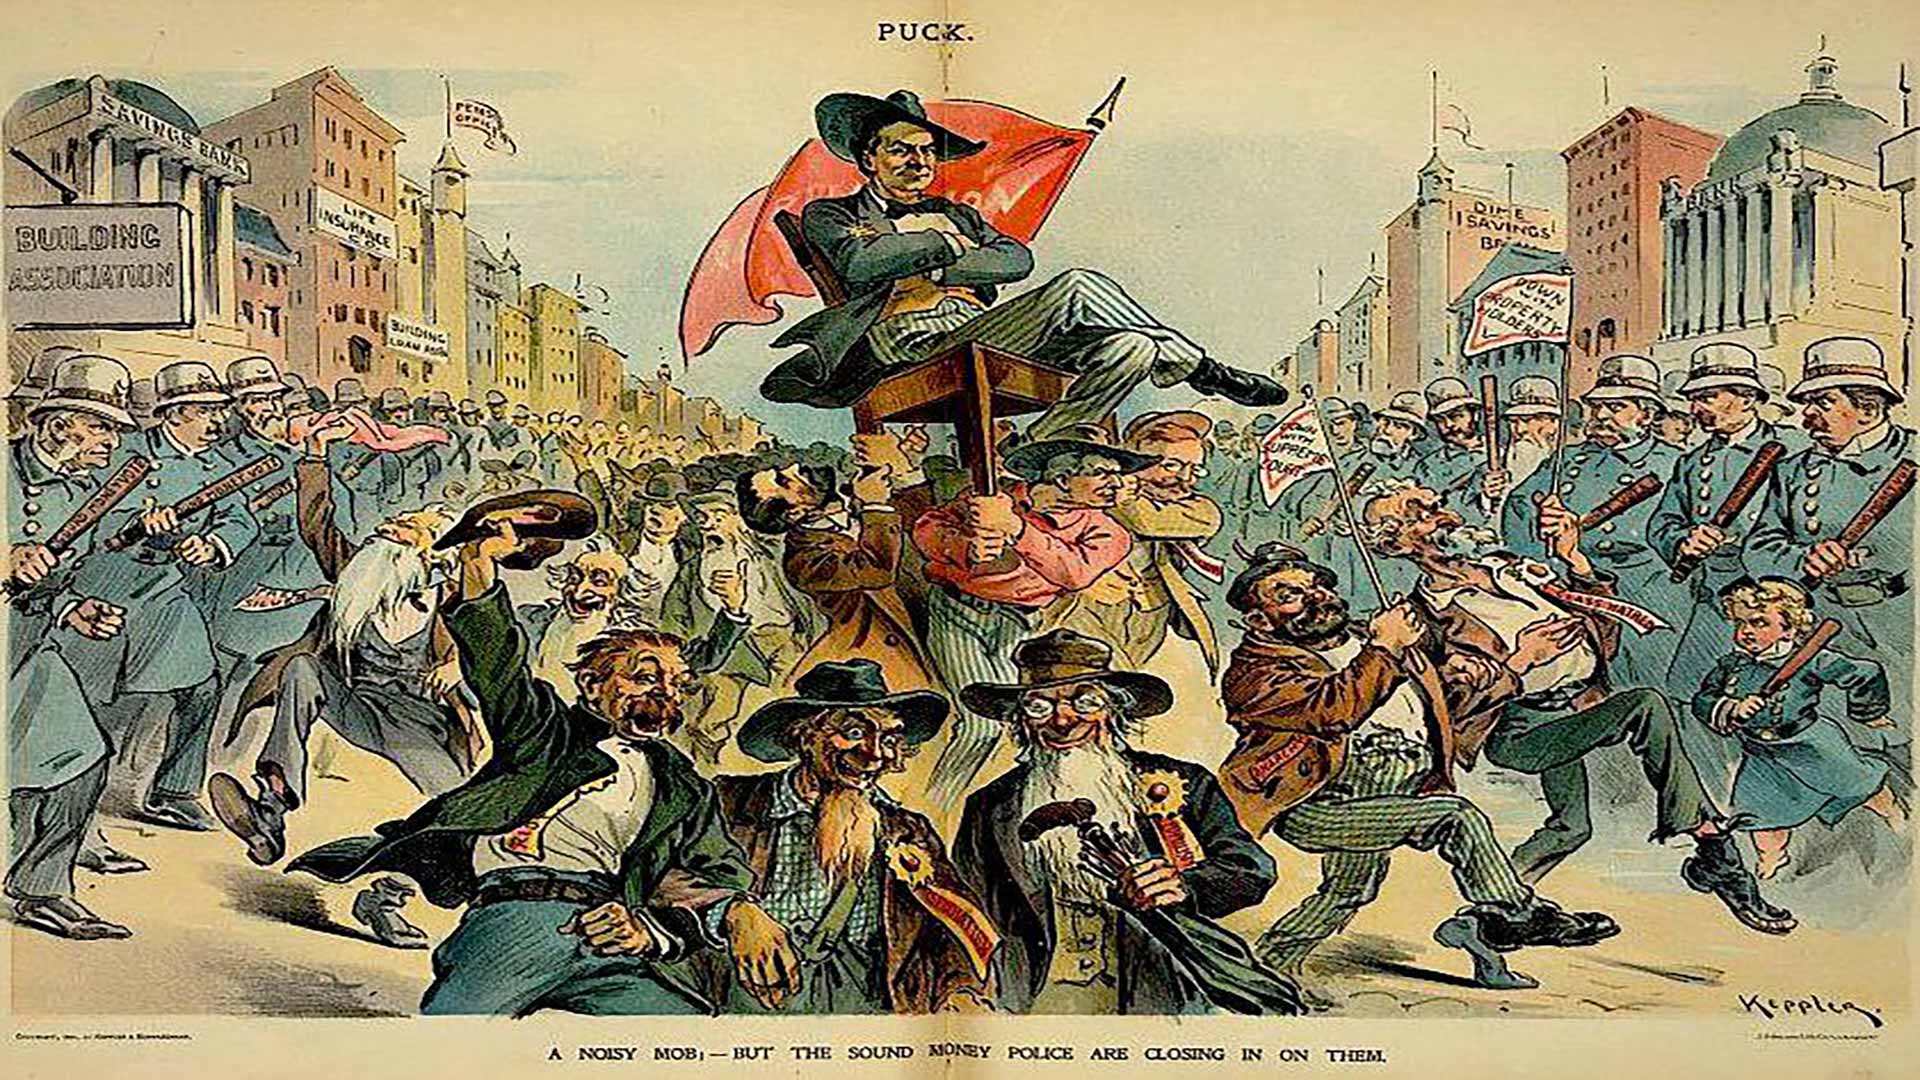 archival political cartoon depicting a crowded street with a man being carried on a chair as police look on menacingly